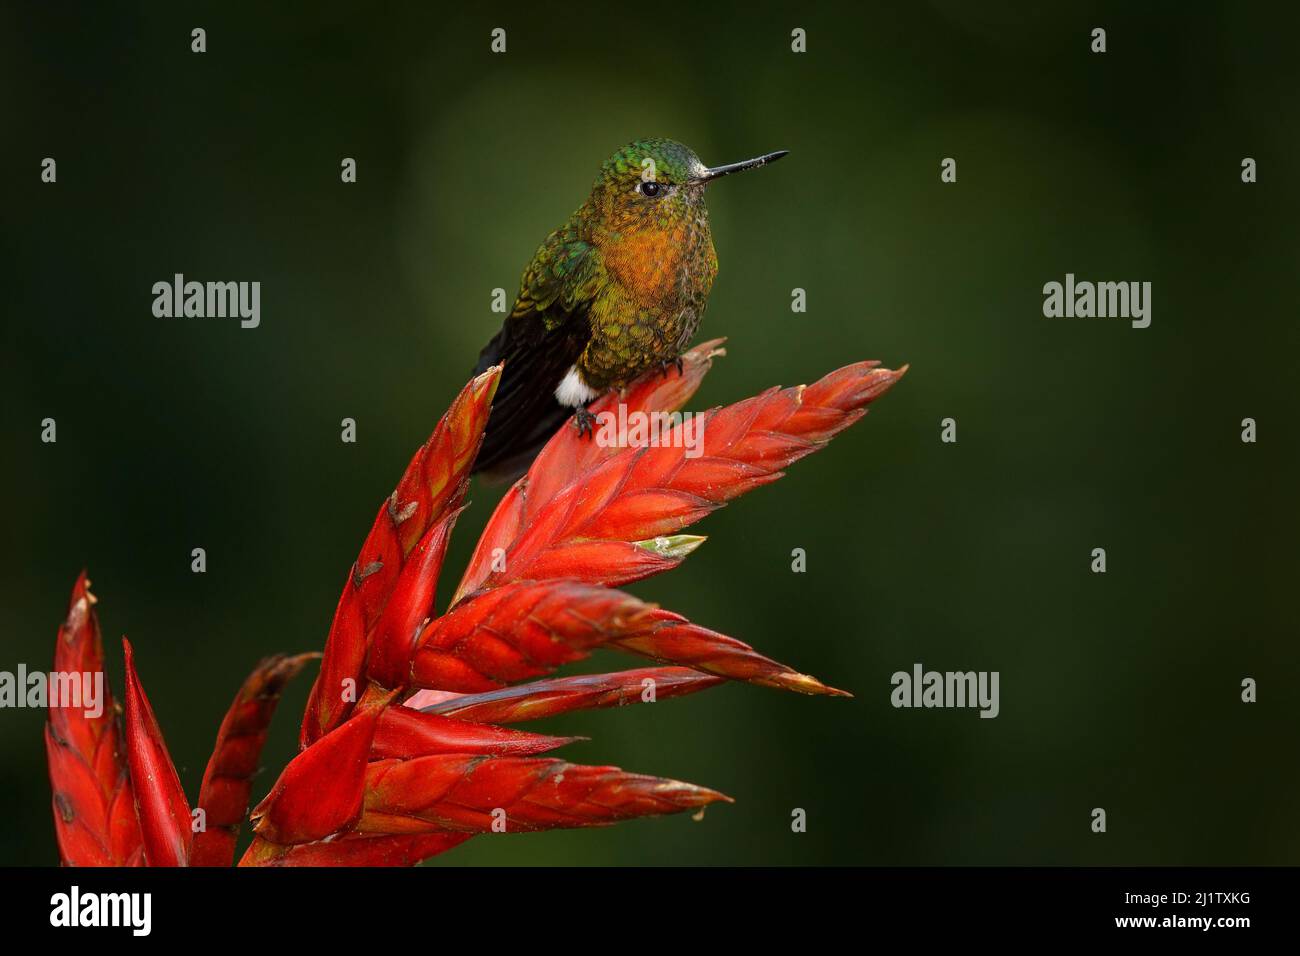 Golden-breasted puffleg, Eriocnemis mosquera, hummingbird on red flower bloom in the dar tropic forest, Yanacocha in Ecuador. Shiny bird in the nature Stock Photo